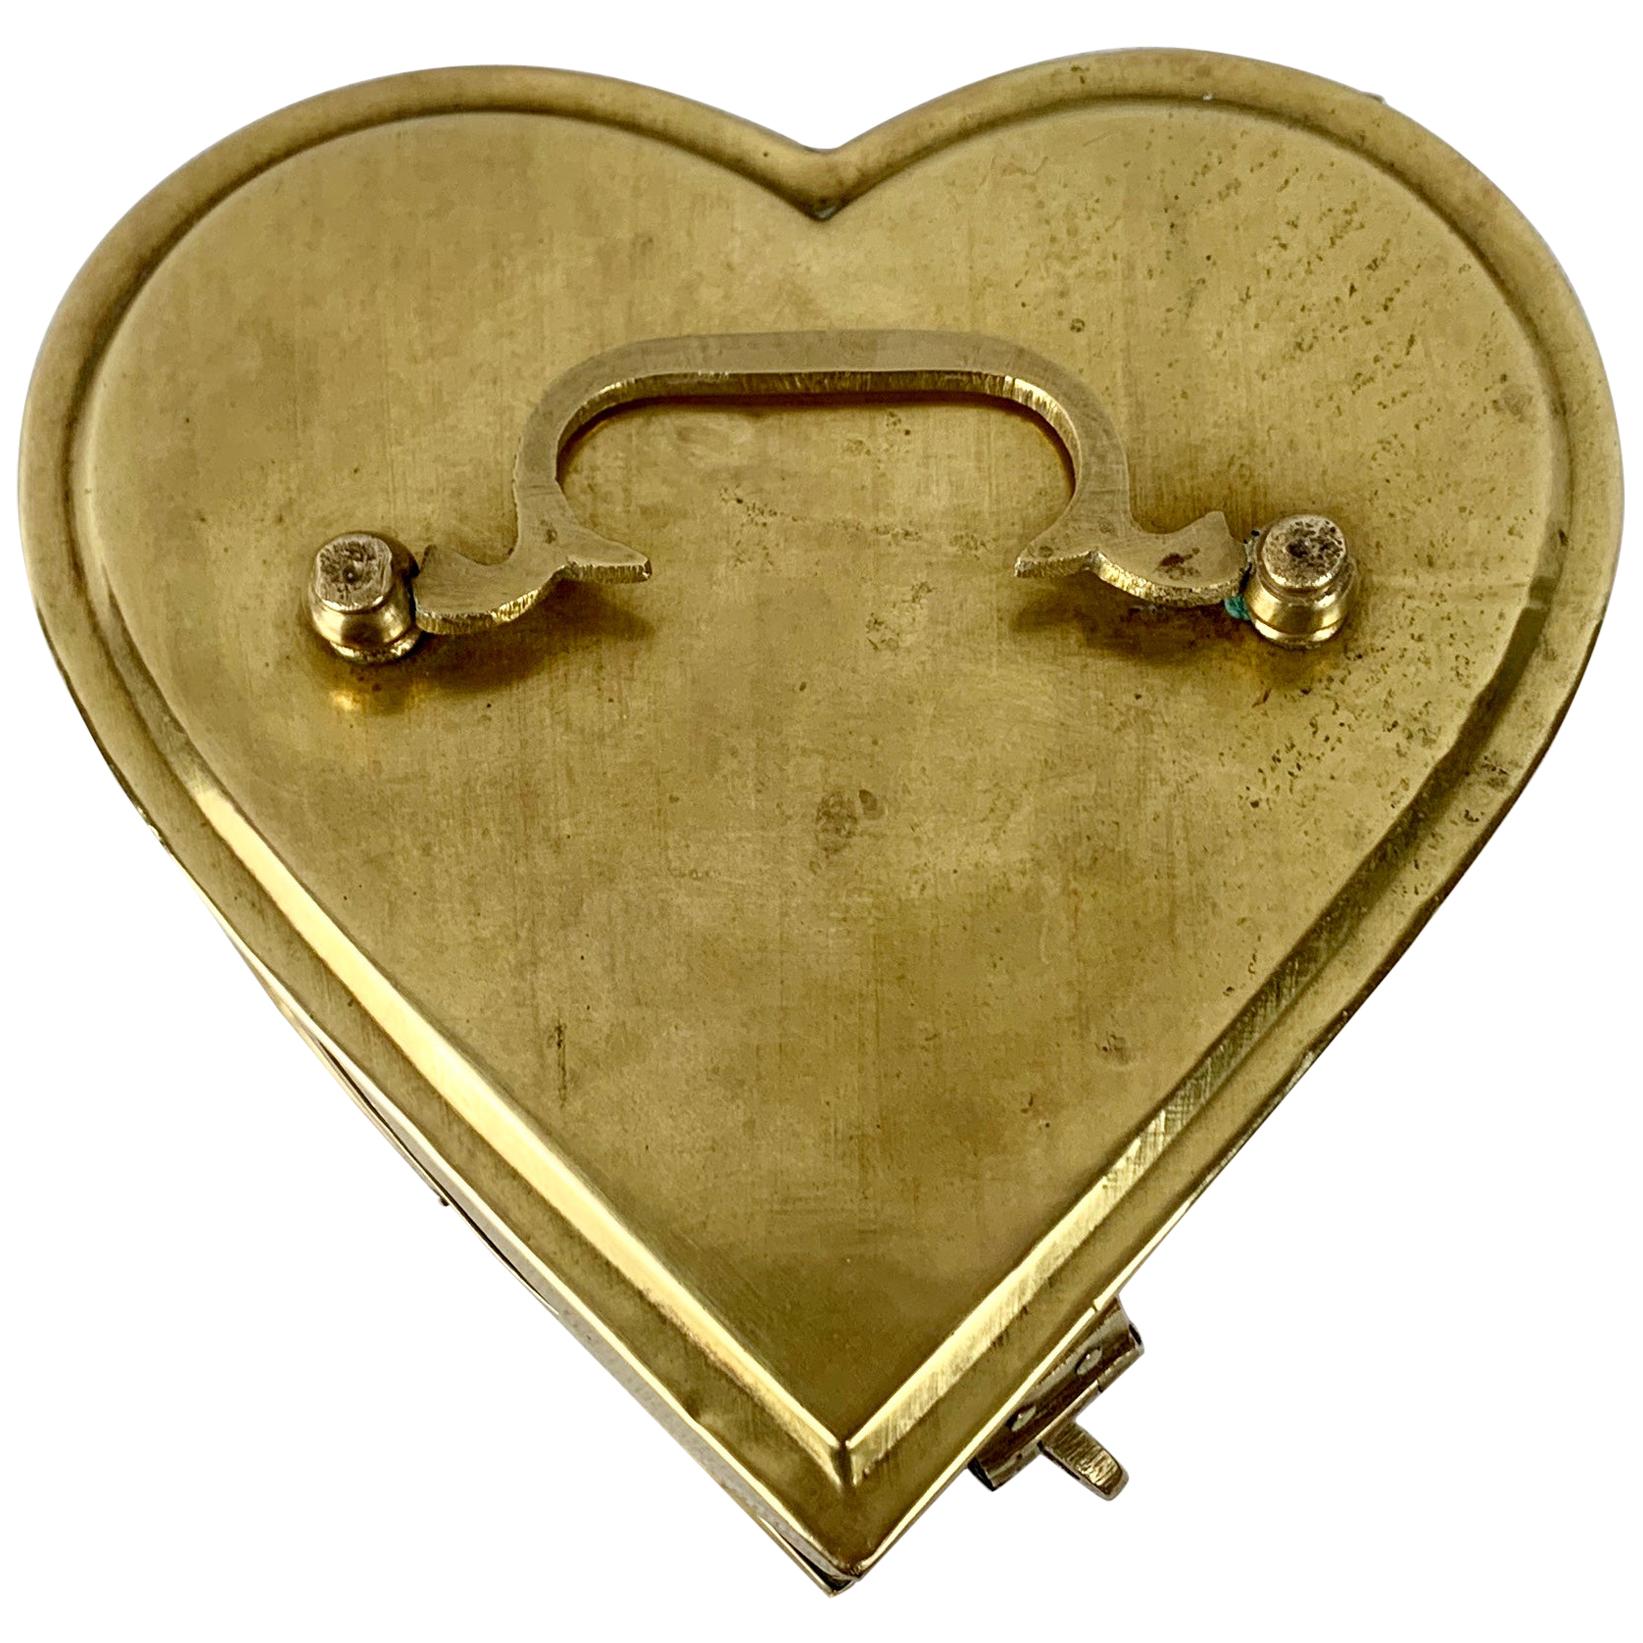 Brass Heart Shaped Vintage Hinged Box with Fold Down Handle